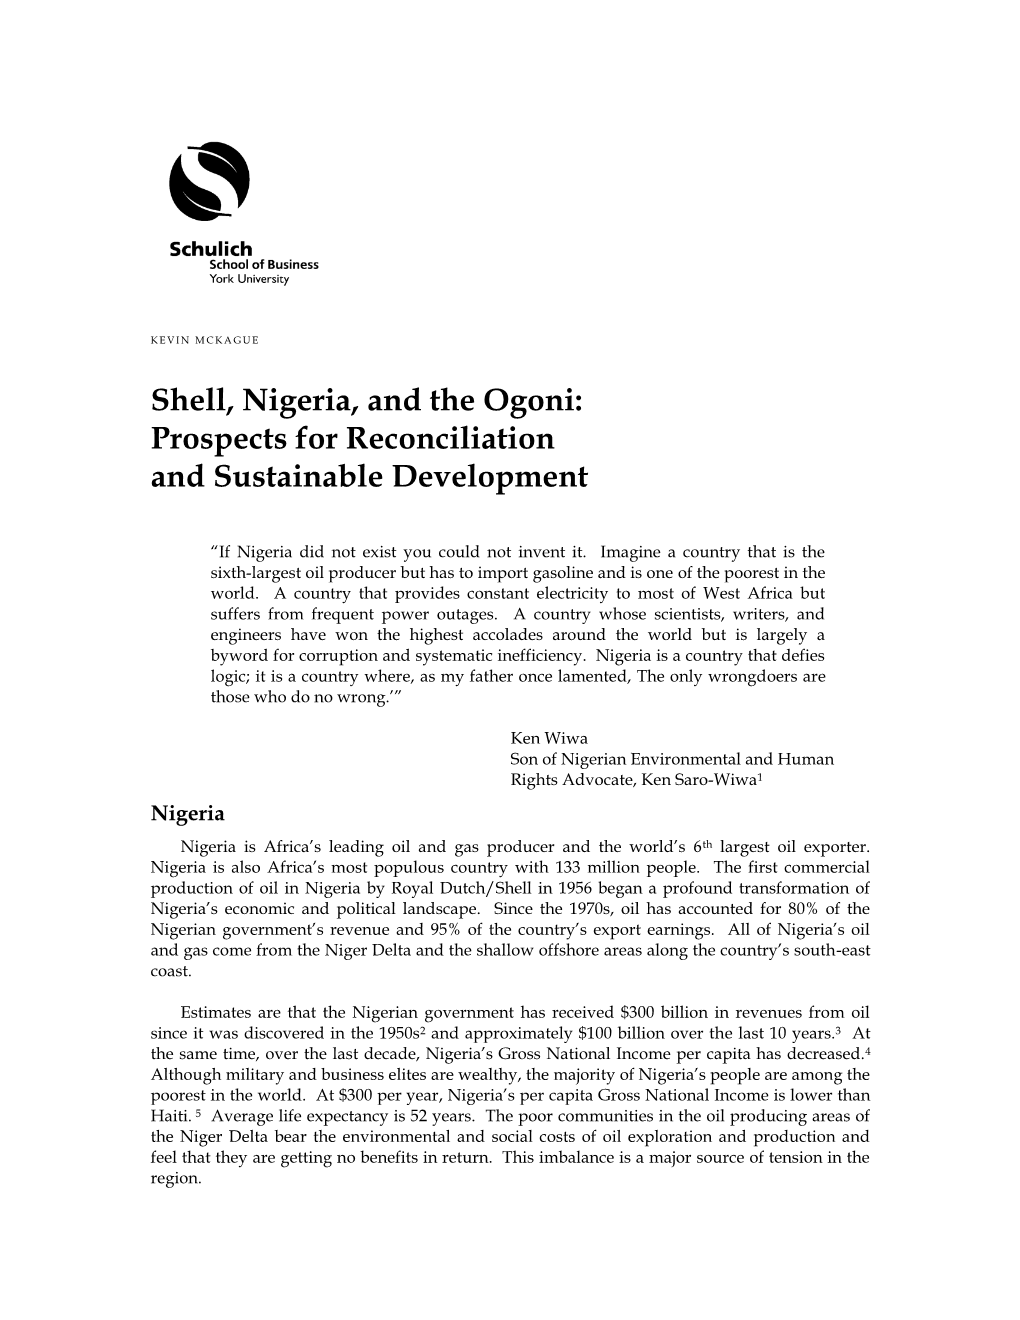 Shell, Nigeria and the Ogoni: Prospects for Reconciliation and Sustainable Development